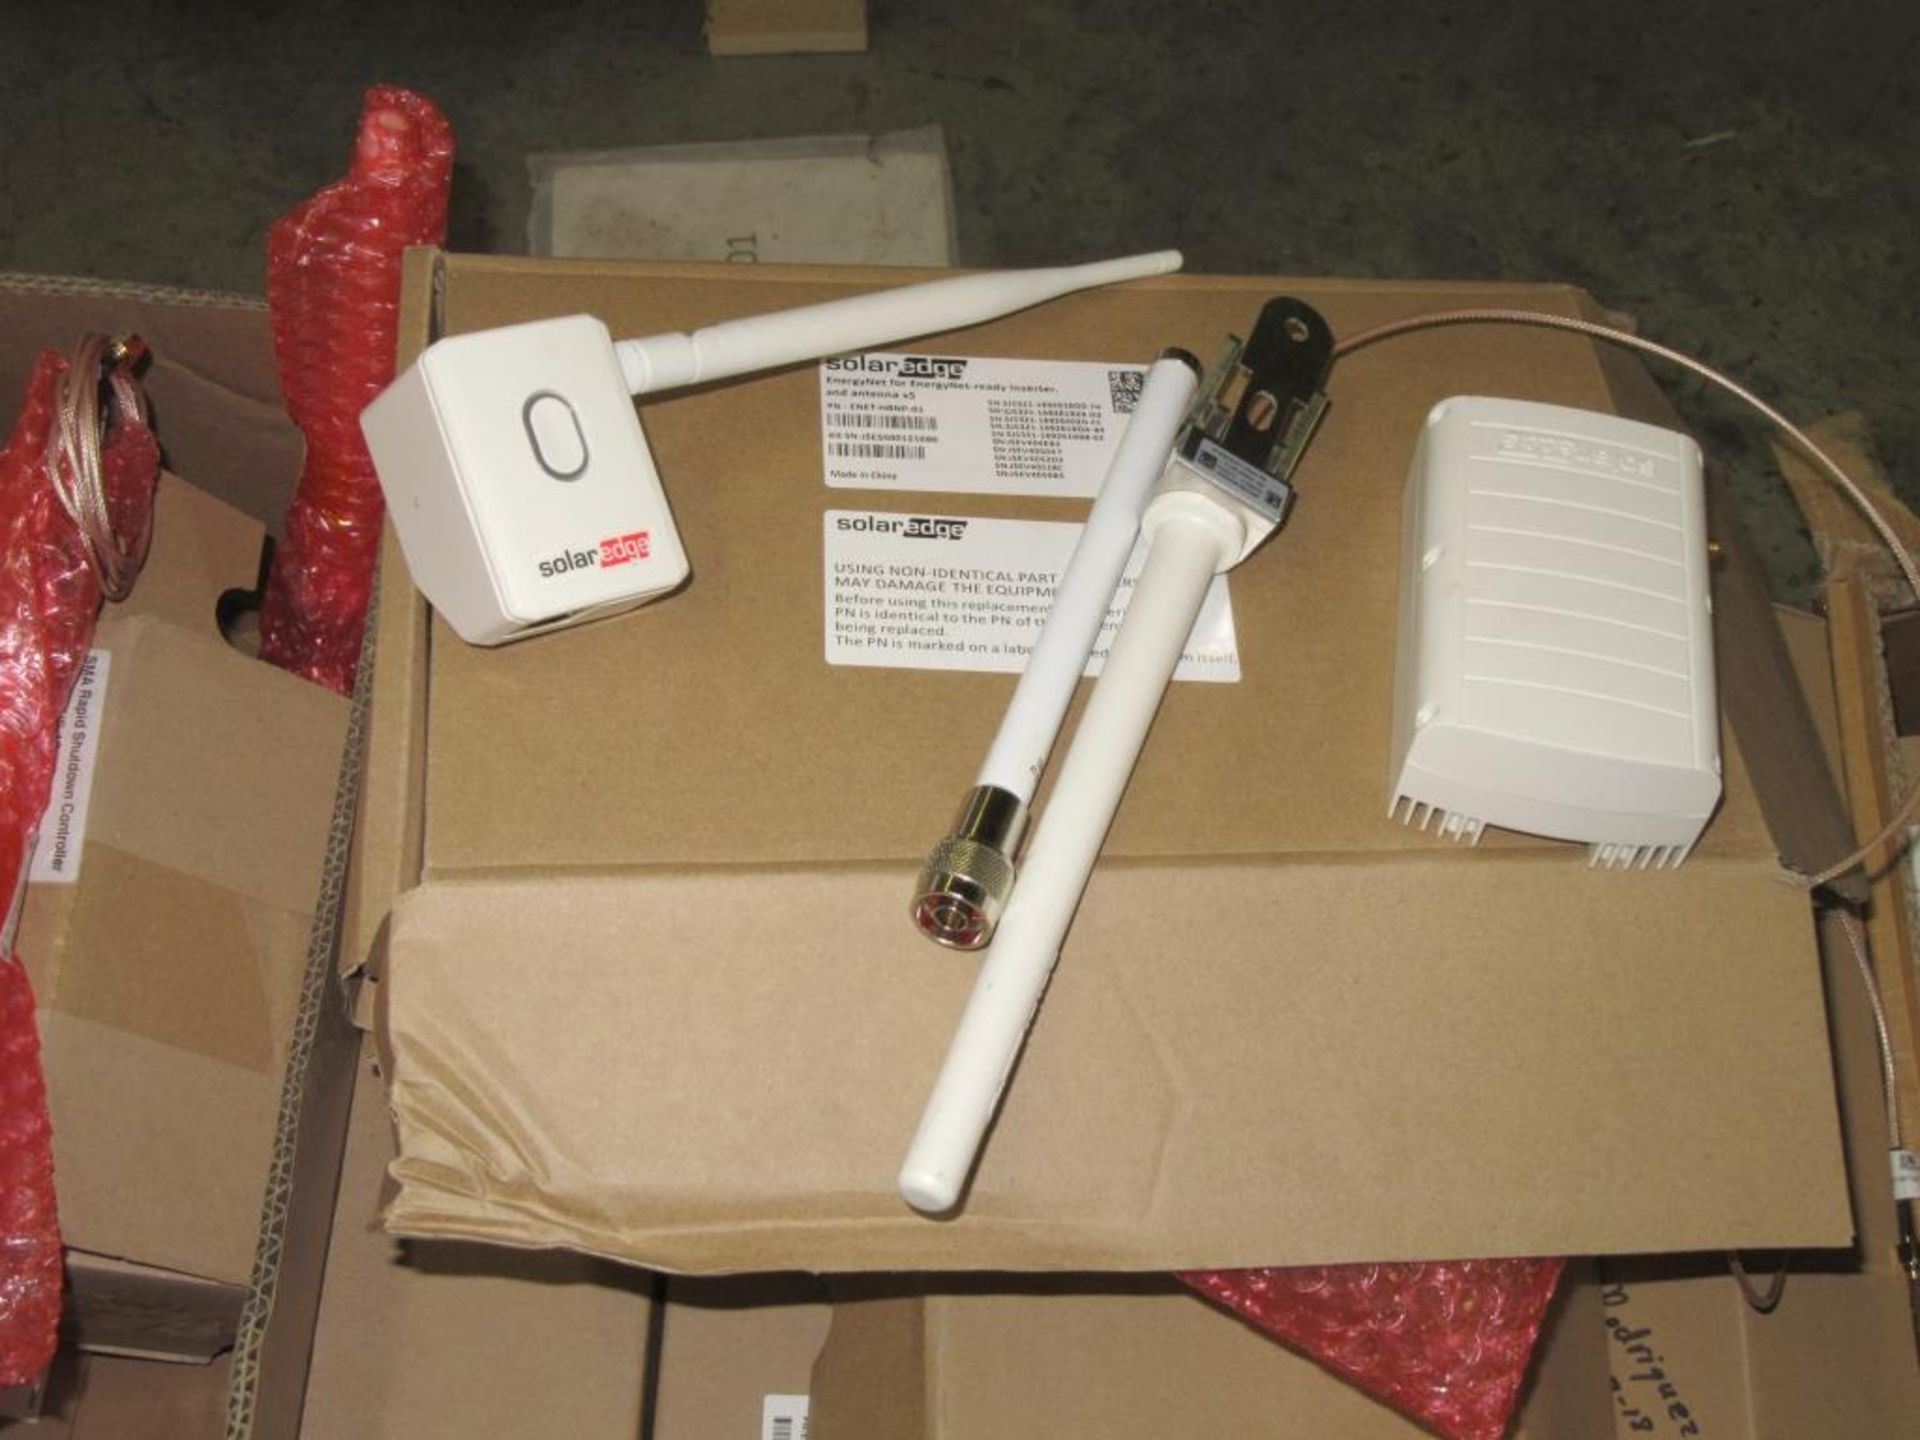 Solar Edge Home Network Plug-In Kits - Image 2 of 4